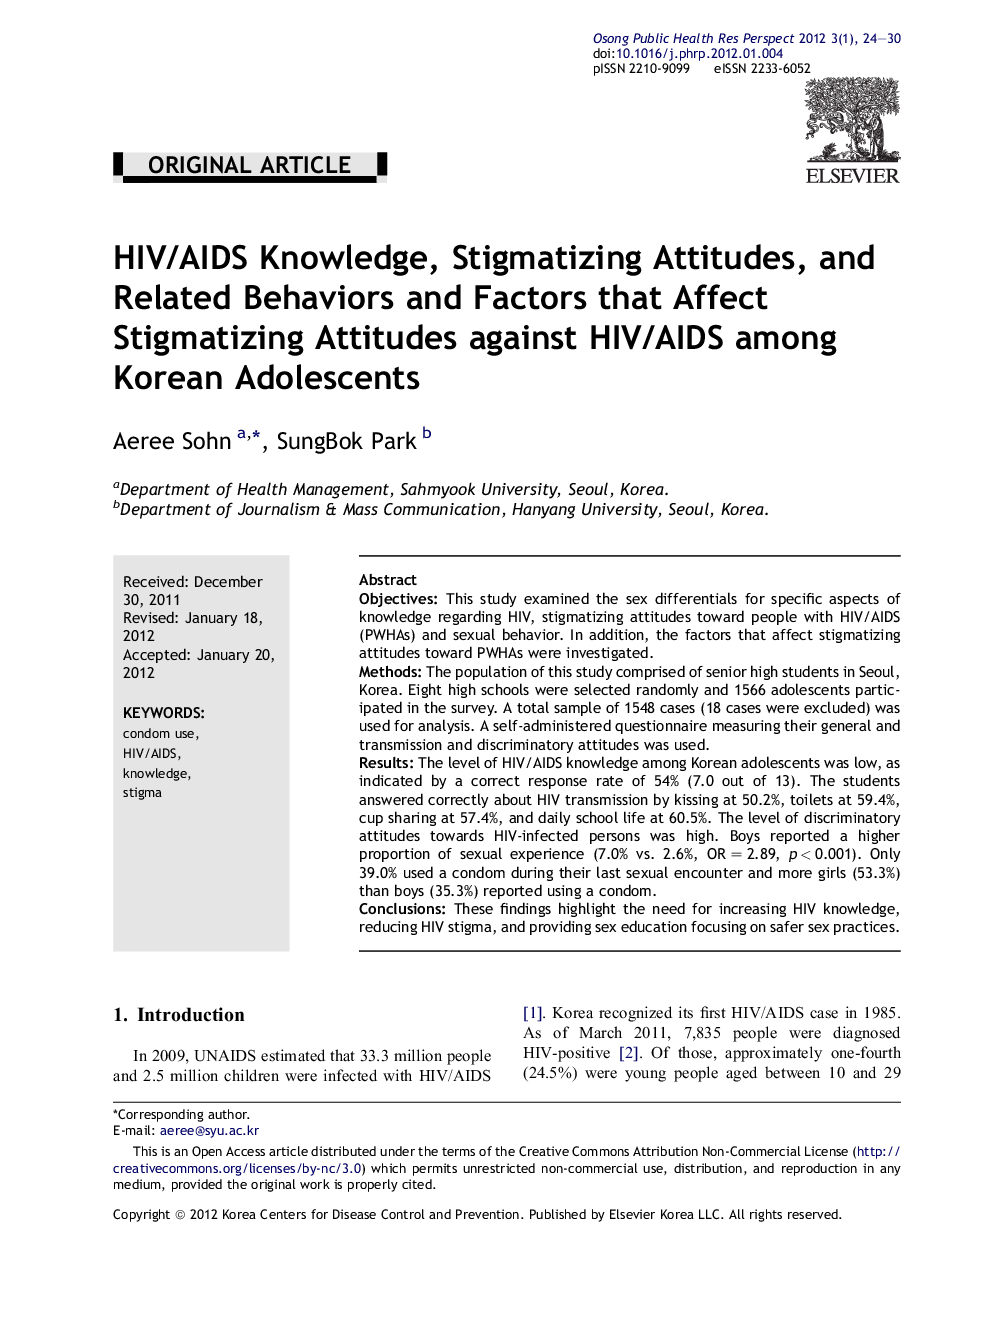 HIV/AIDS Knowledge, Stigmatizing Attitudes, and Related Behaviors and Factors that Affect Stigmatizing Attitudes against HIV/AIDS among Korean Adolescents 